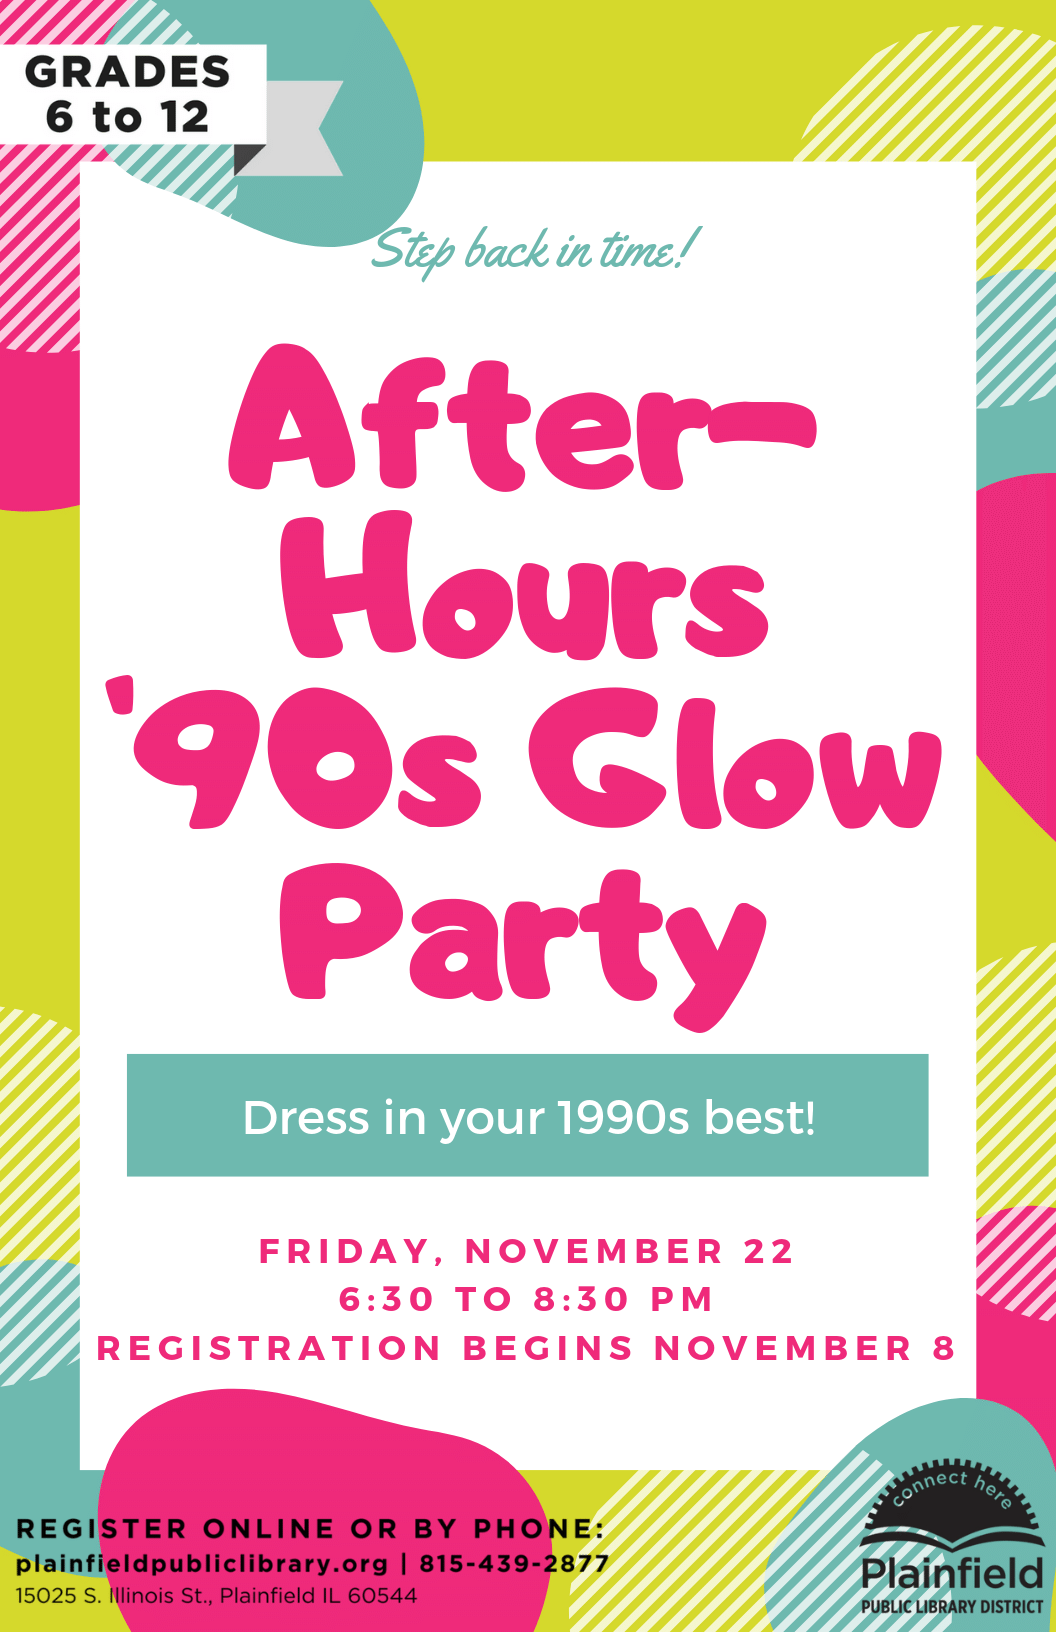 '90s Glow Party